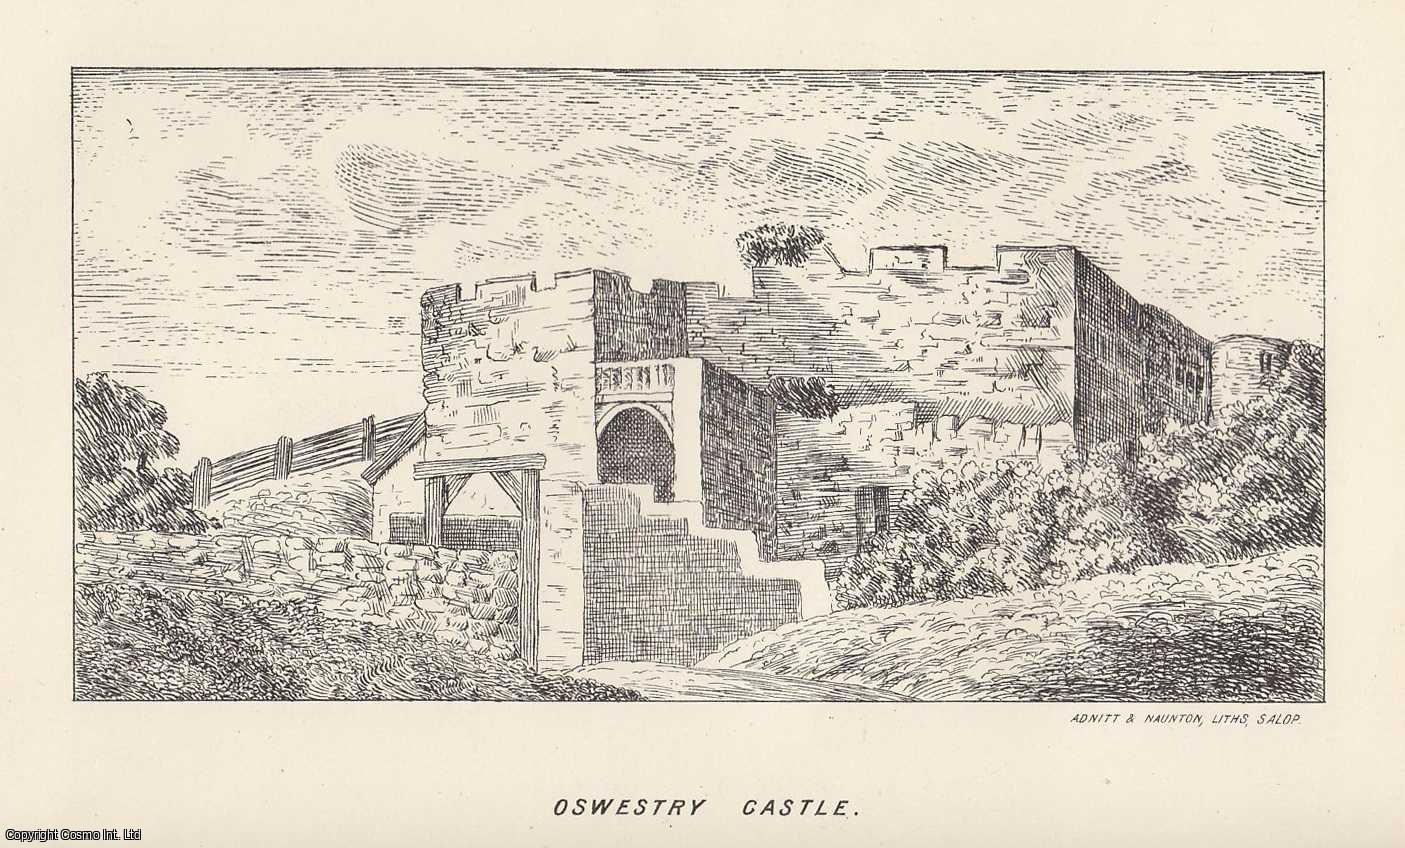 J. Parry-Jones - The Story of Oswestry Castle. This is an original article from the Shropshire Archaeological & Natural History Society Journal, 1894.